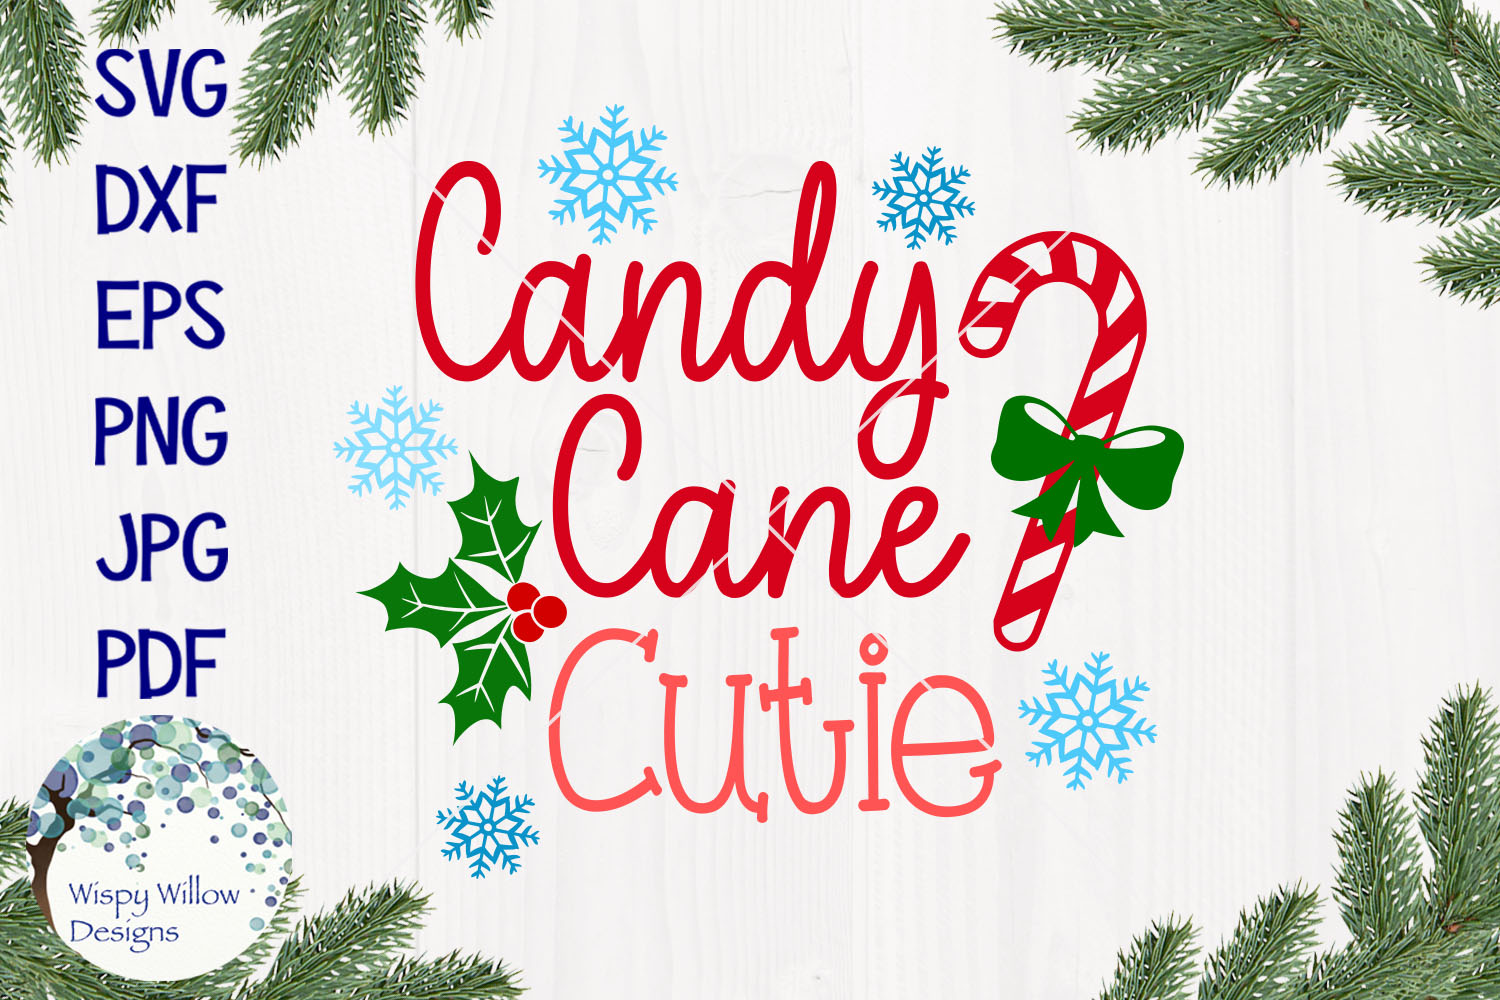 Download Candy Cane Cutie | Christmas SVG Cut File